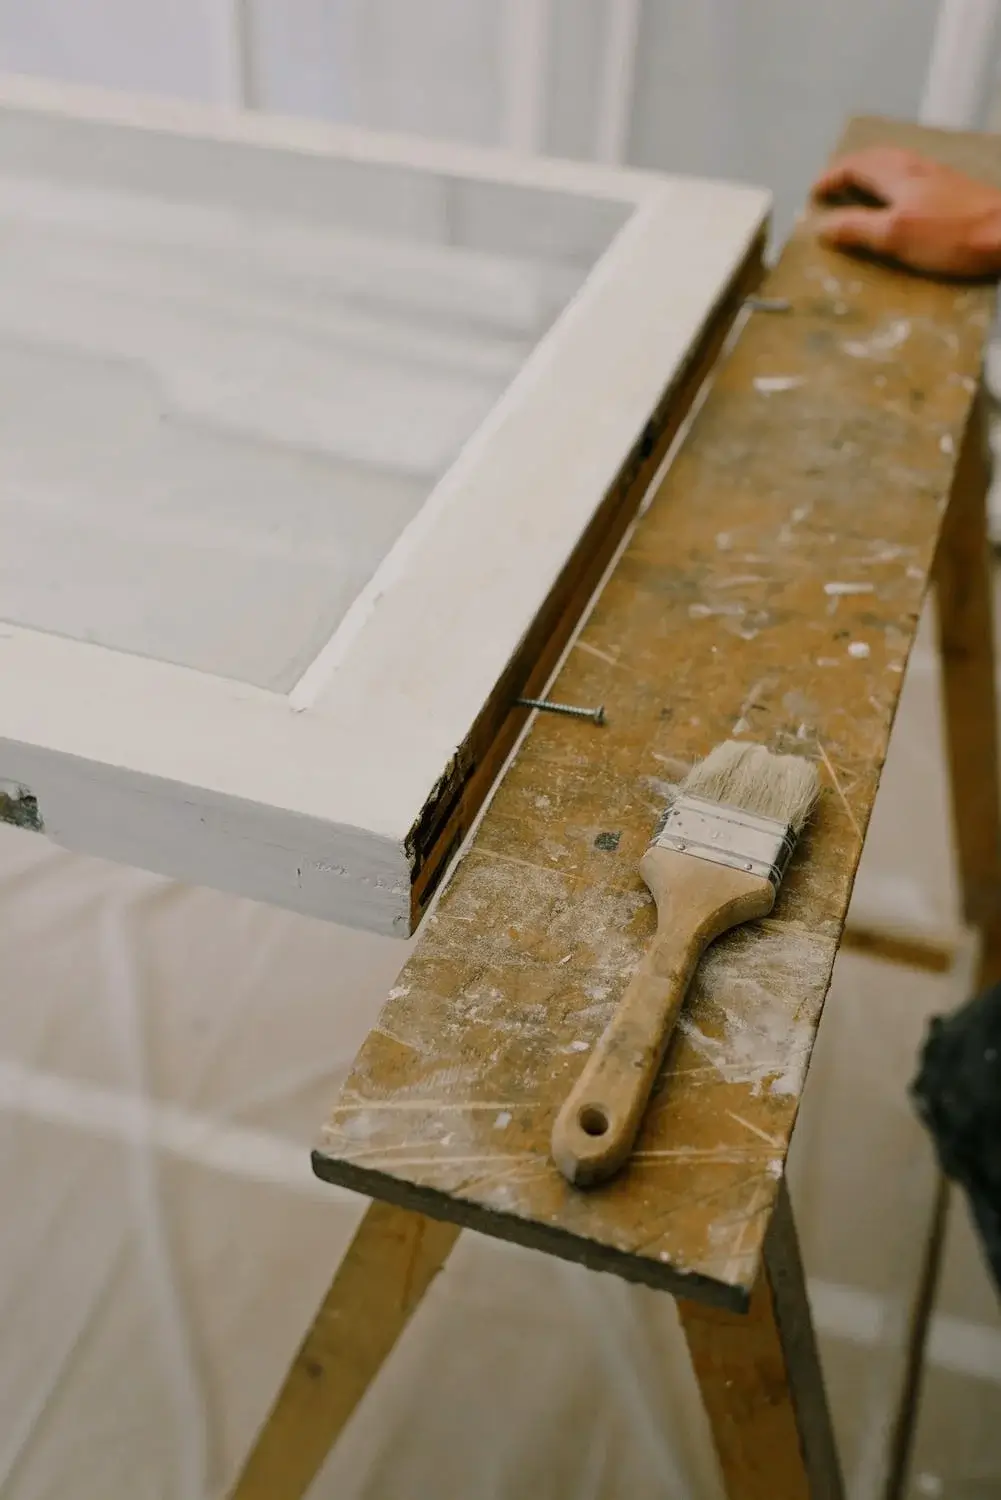 A window and a paintbrush are on a work bench. There is a hand on the workbench in the background.